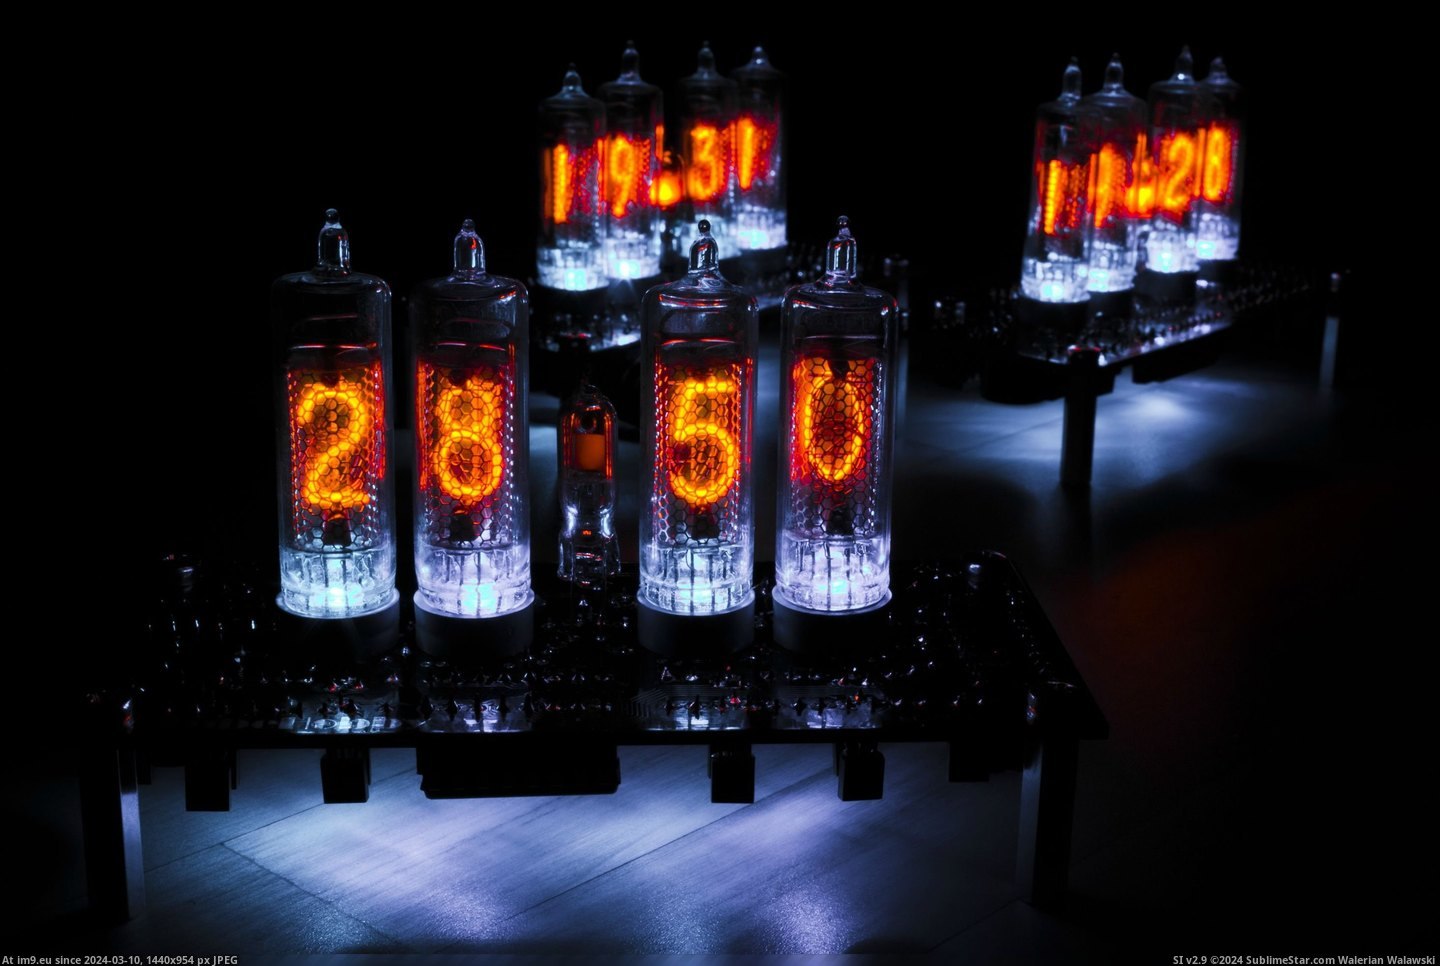 #Built #Project #Possibly #Electronics #Nixie #Tube #Clock #Coolest [Pics] Just built a Nixie Tube clock. Quite possibly the coolest electronics project I've done to date. Pic. (Image of album My r/PICS favs))